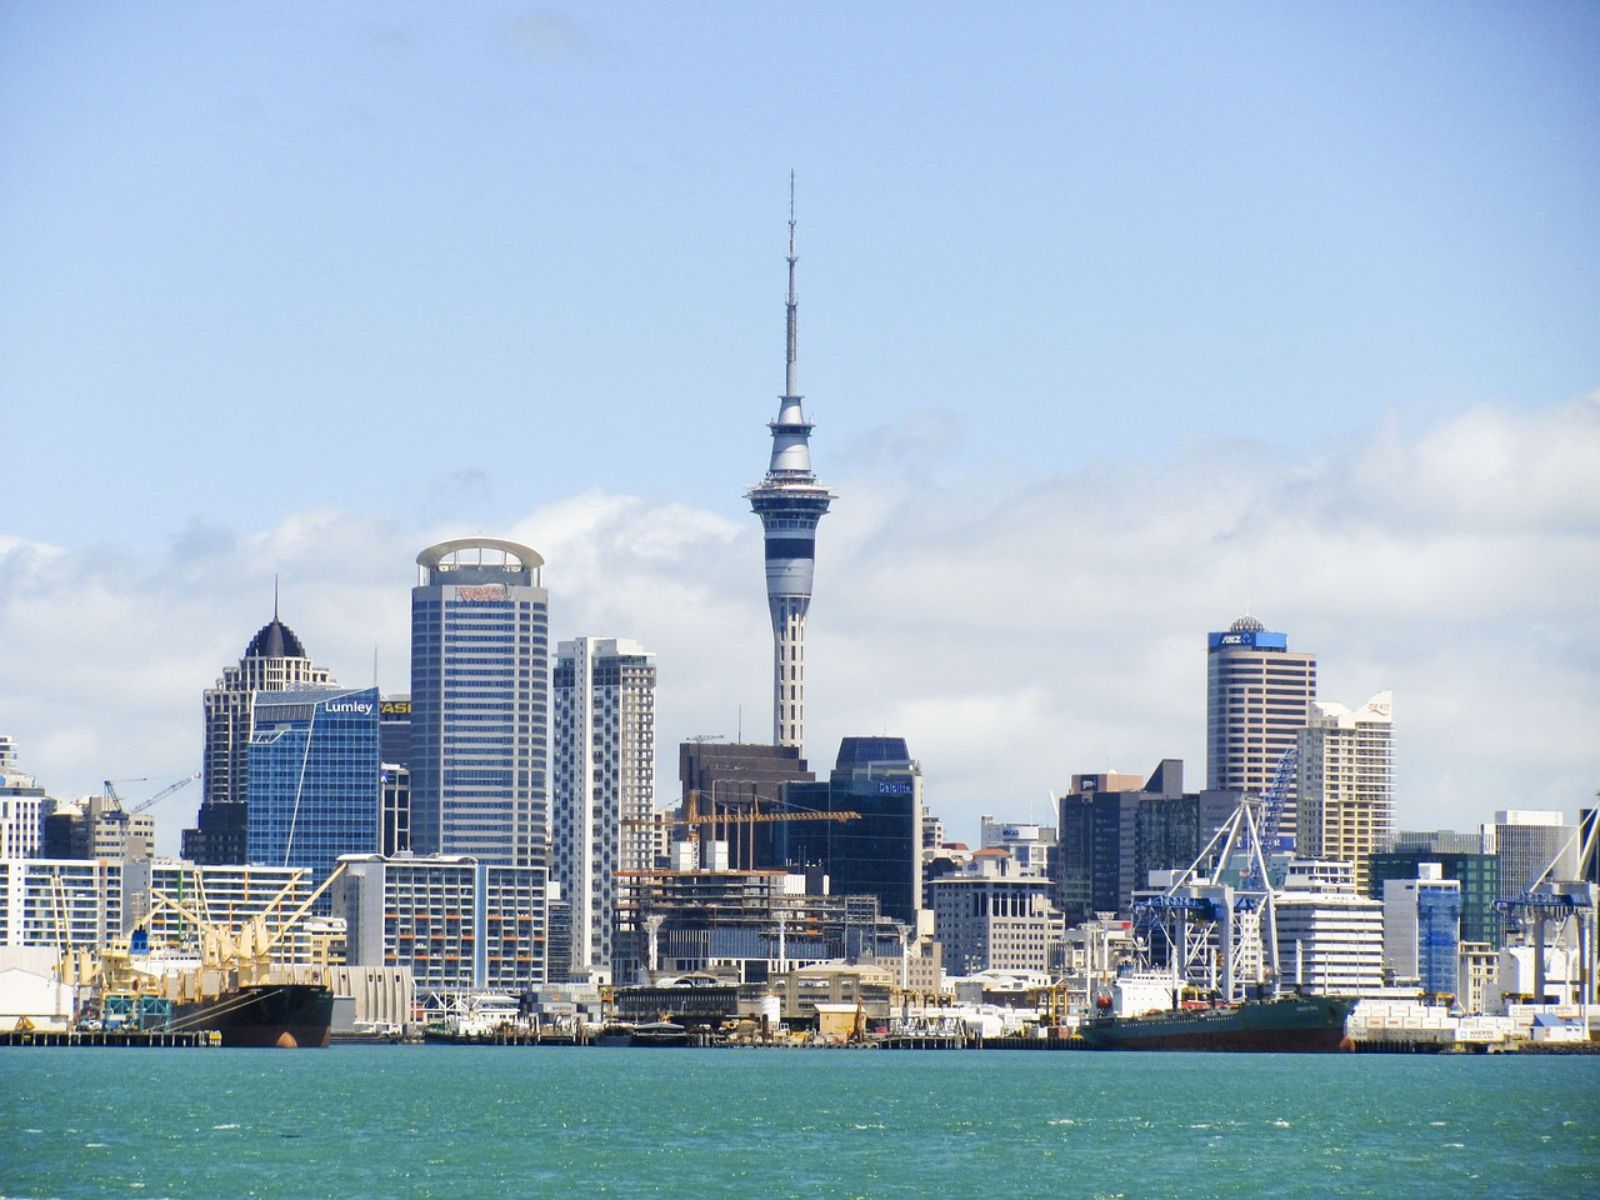 New Zealand Ministry Of Health Data Demonstrates Medical Cannabis Industry Growth